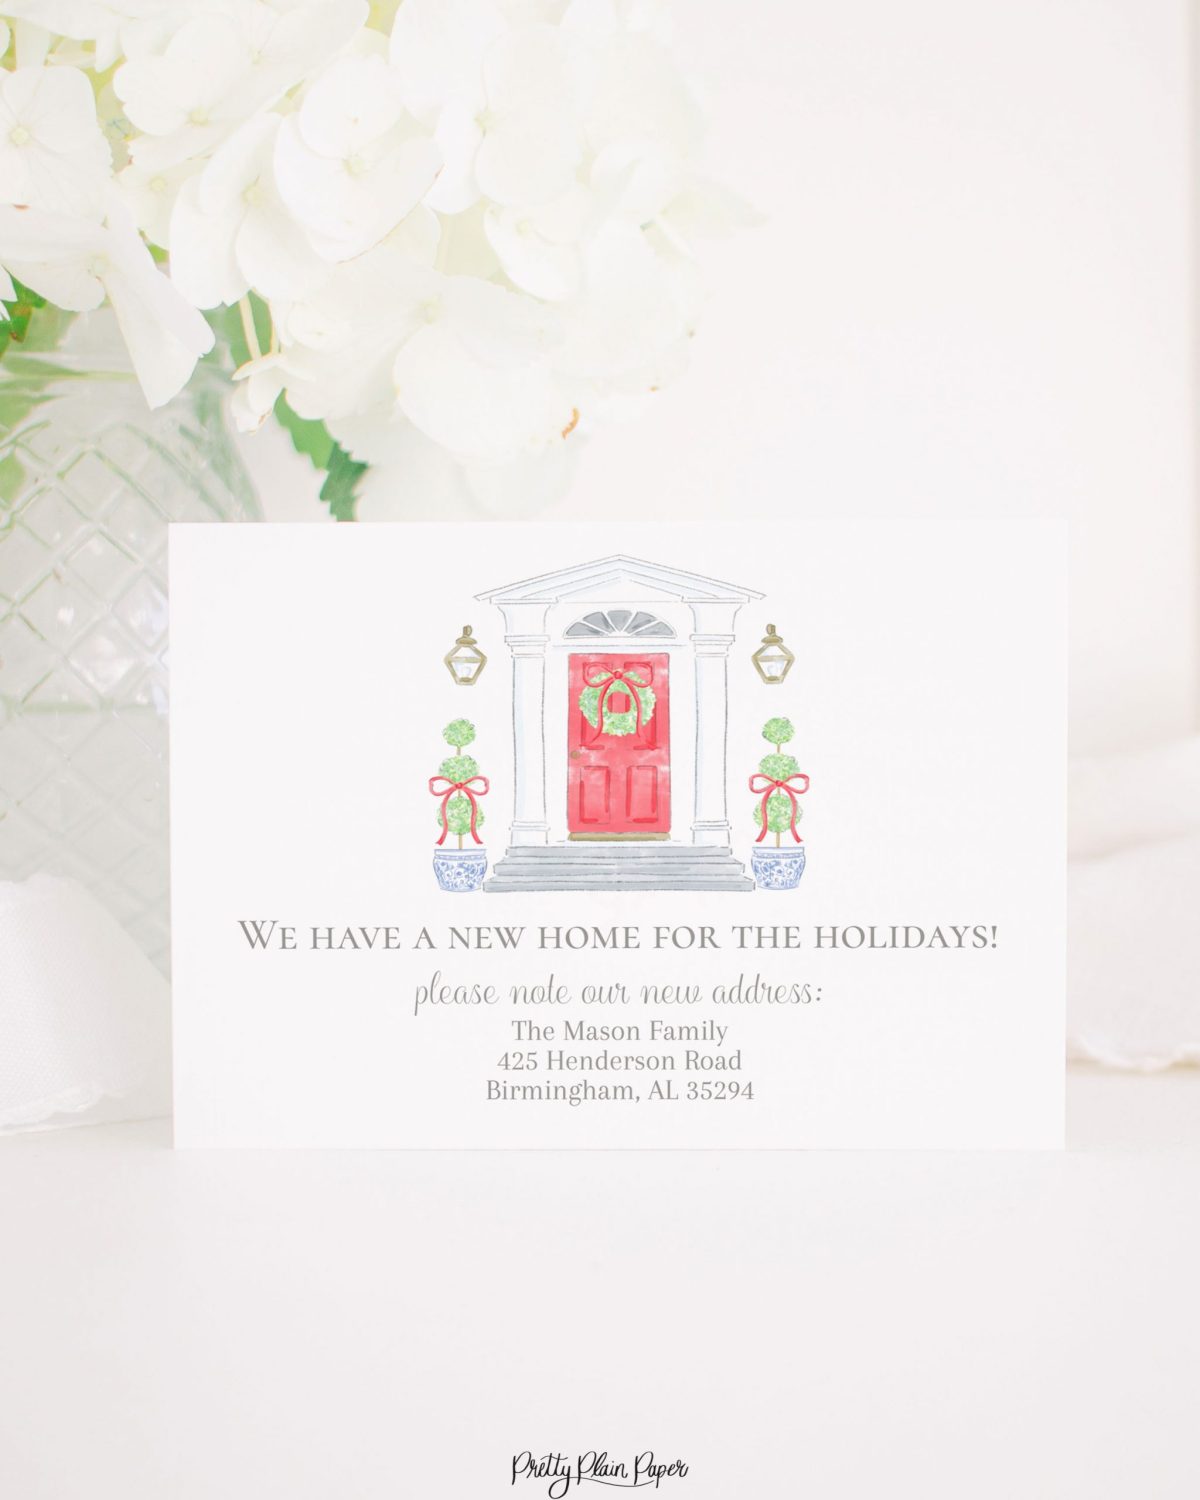 Watercolor Christmas Card with Photo by Pretty Plain Paper a Grandmillennial Christmas Card with Red Bow and Green Wreath New Home or Moving Announcement, We've Moved Holiday Card Insert for New Address with Blue and White Chinoiserie Topiary